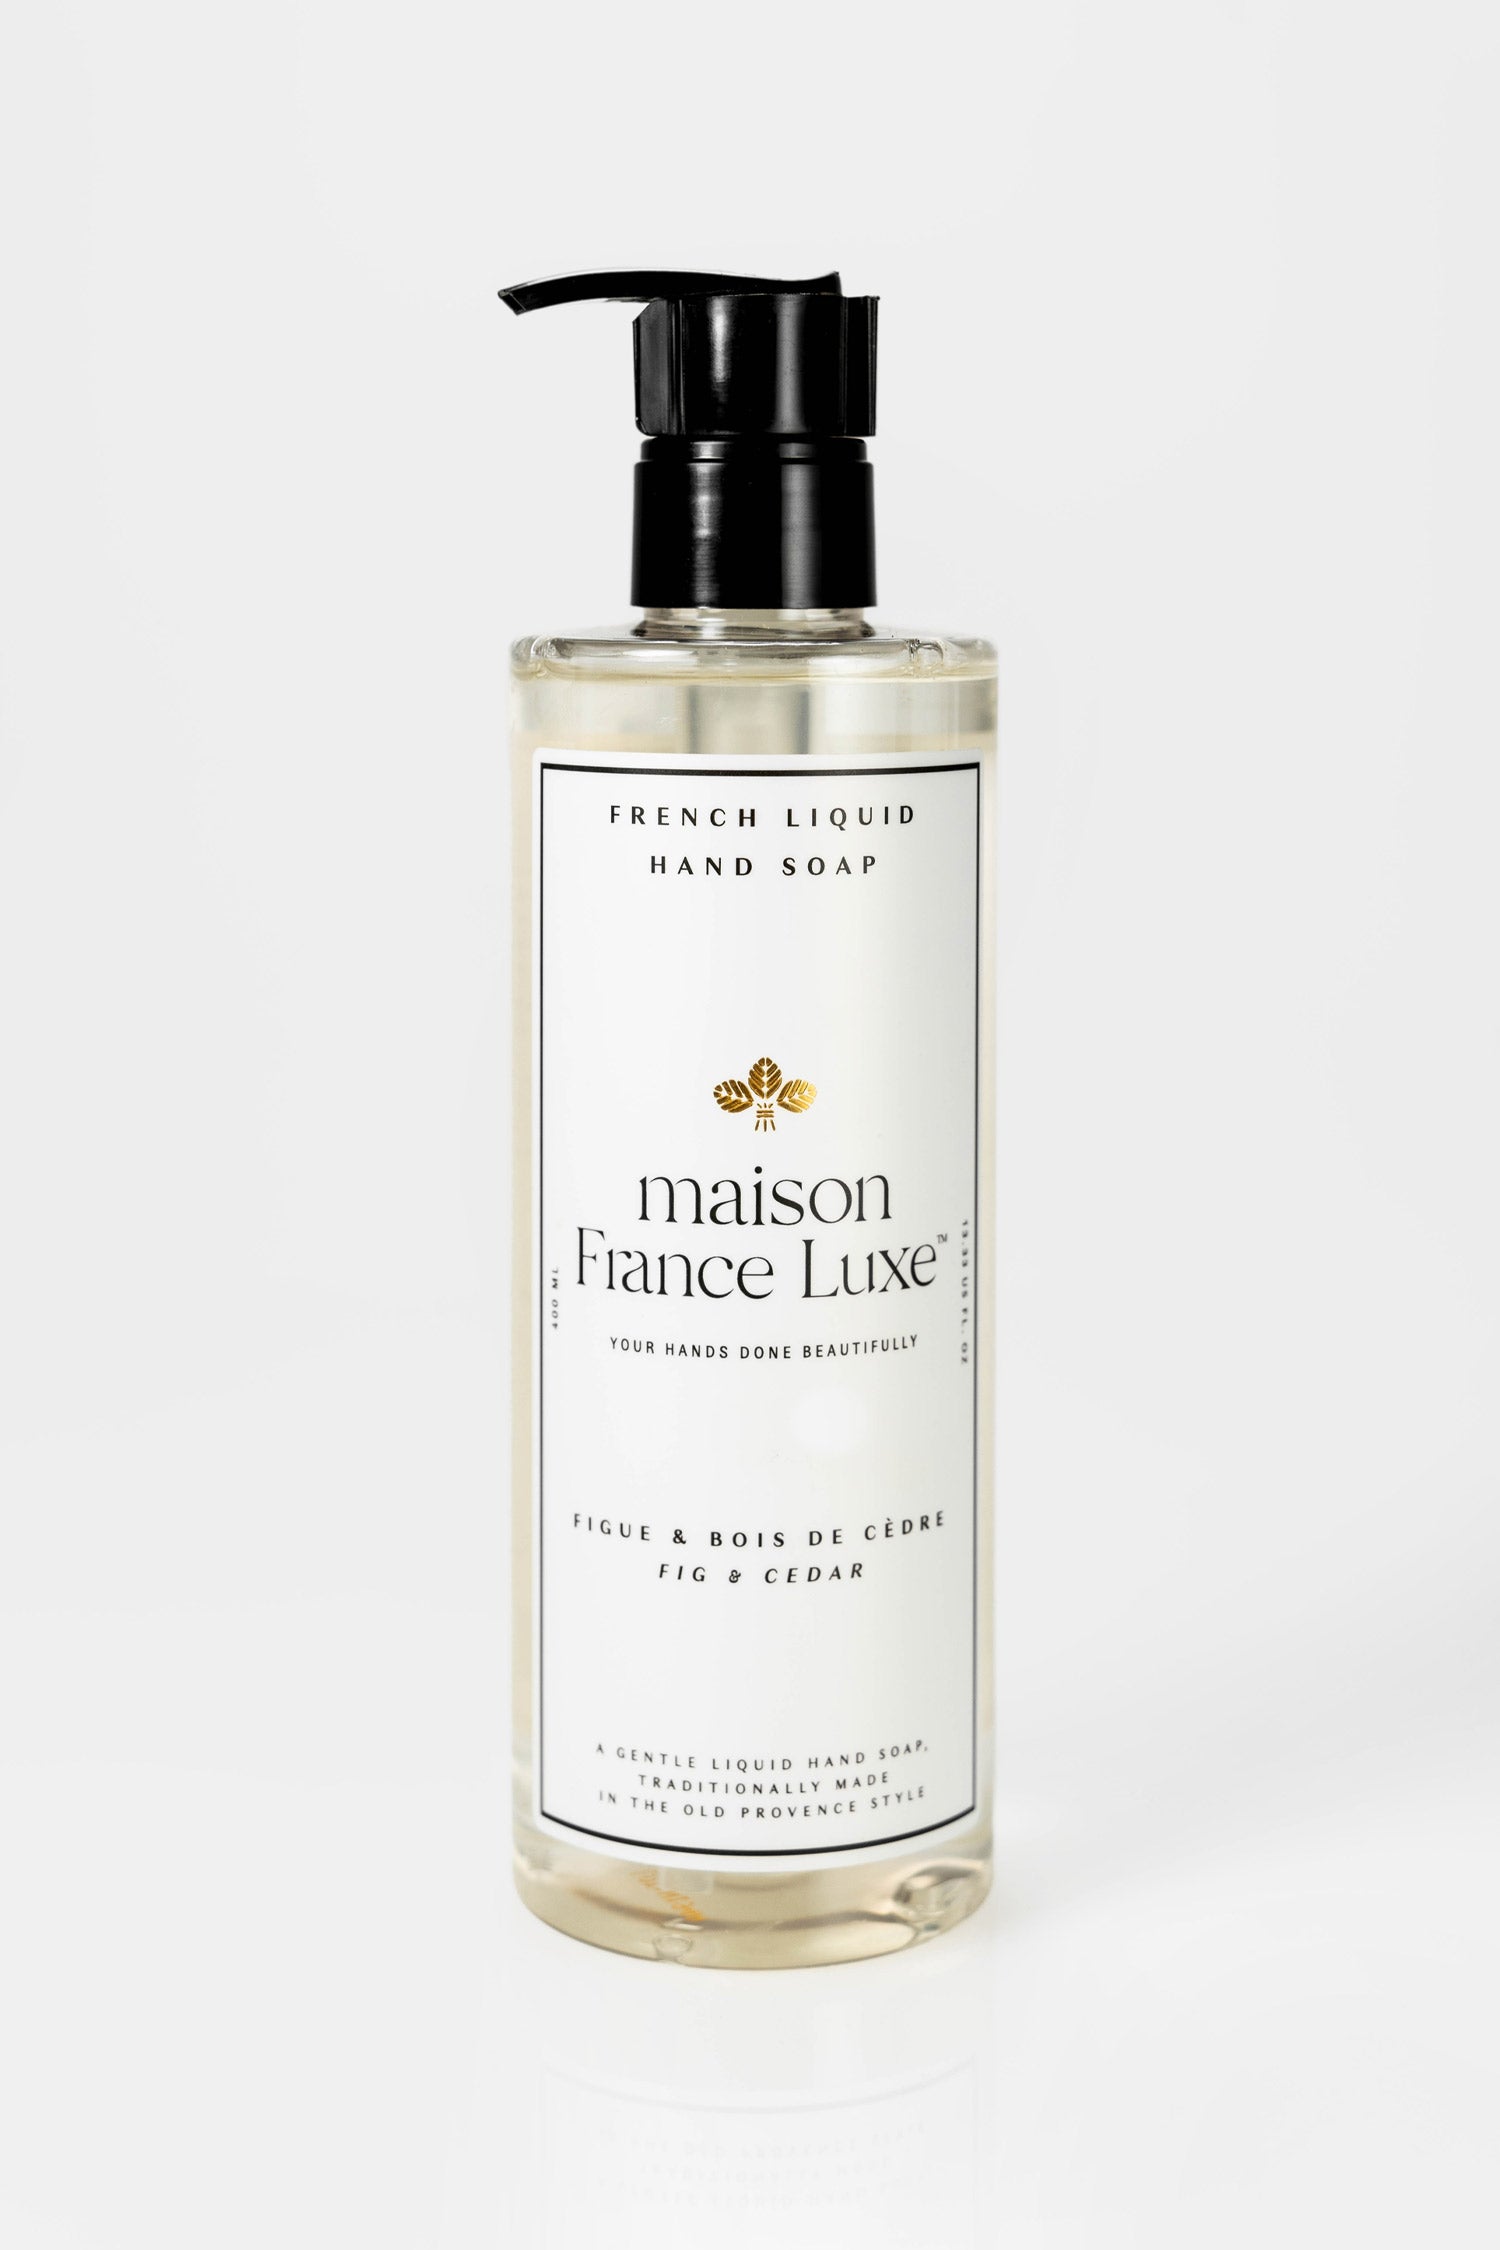 Natural Hand soap, made in France with luxurious Fig & Cedar scent and plant-based ingredients.